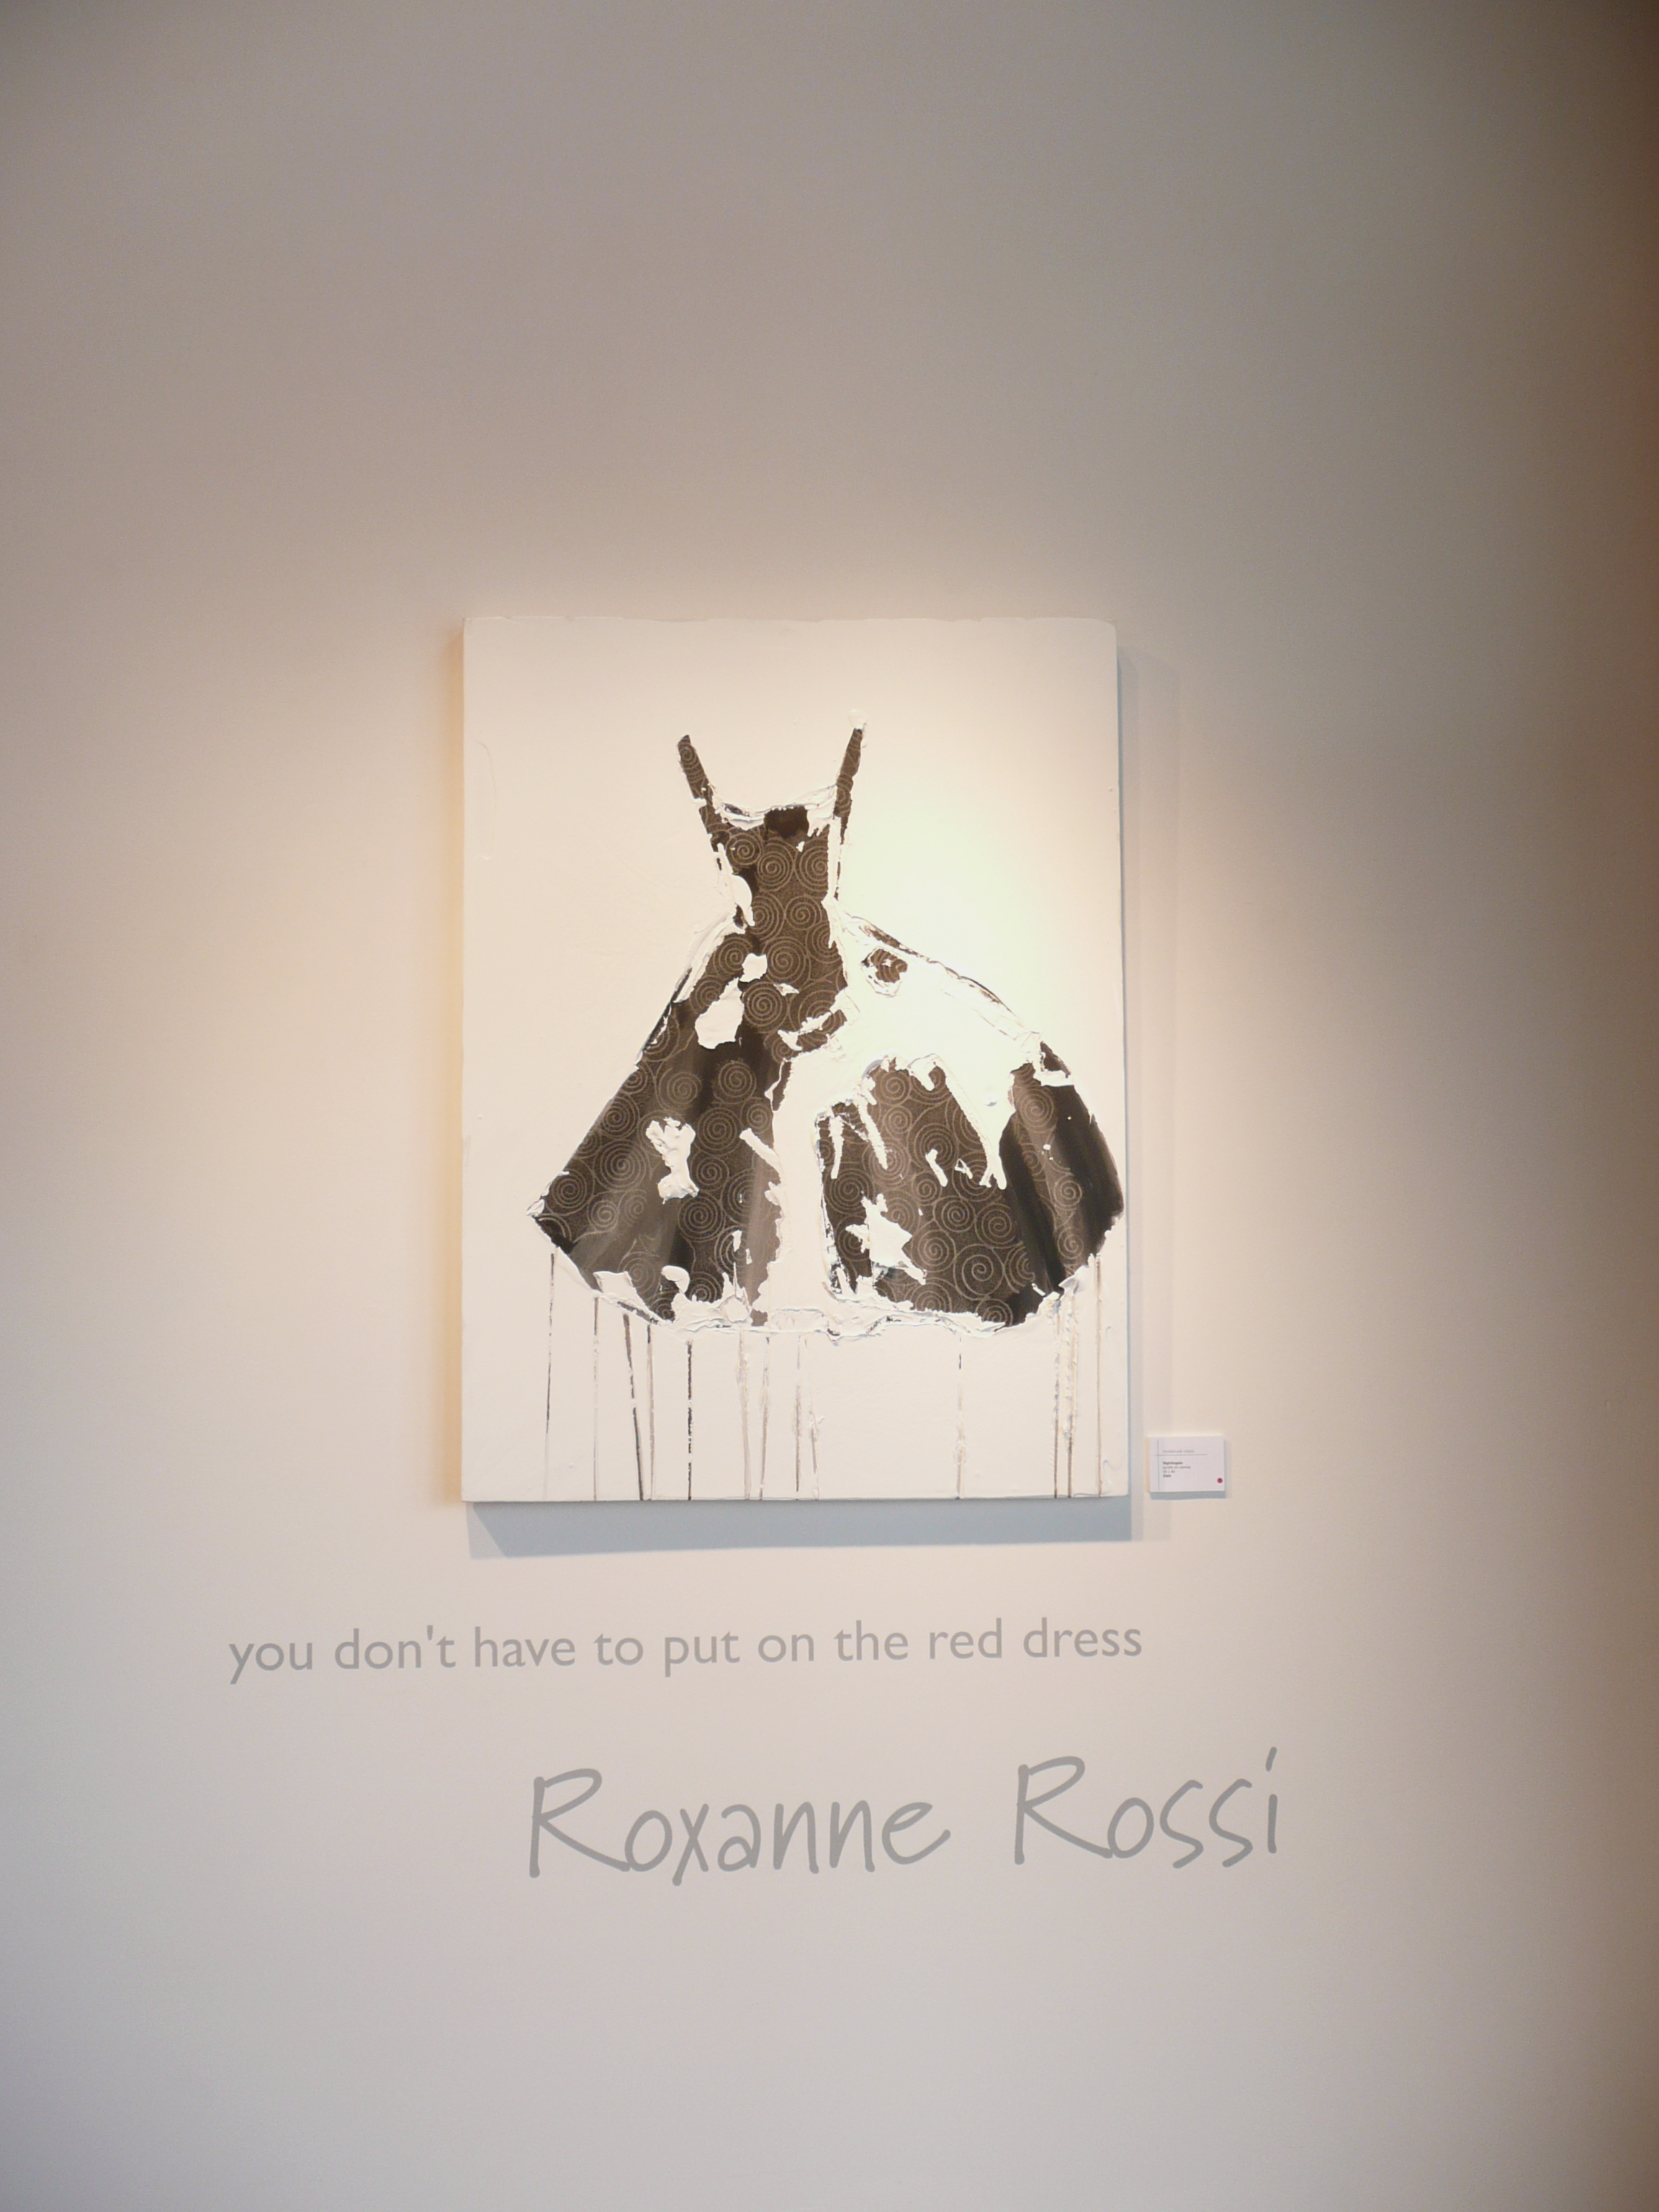 Roxanne Rossi "You Don't Have To Put On The RED DRESS" Exhibit